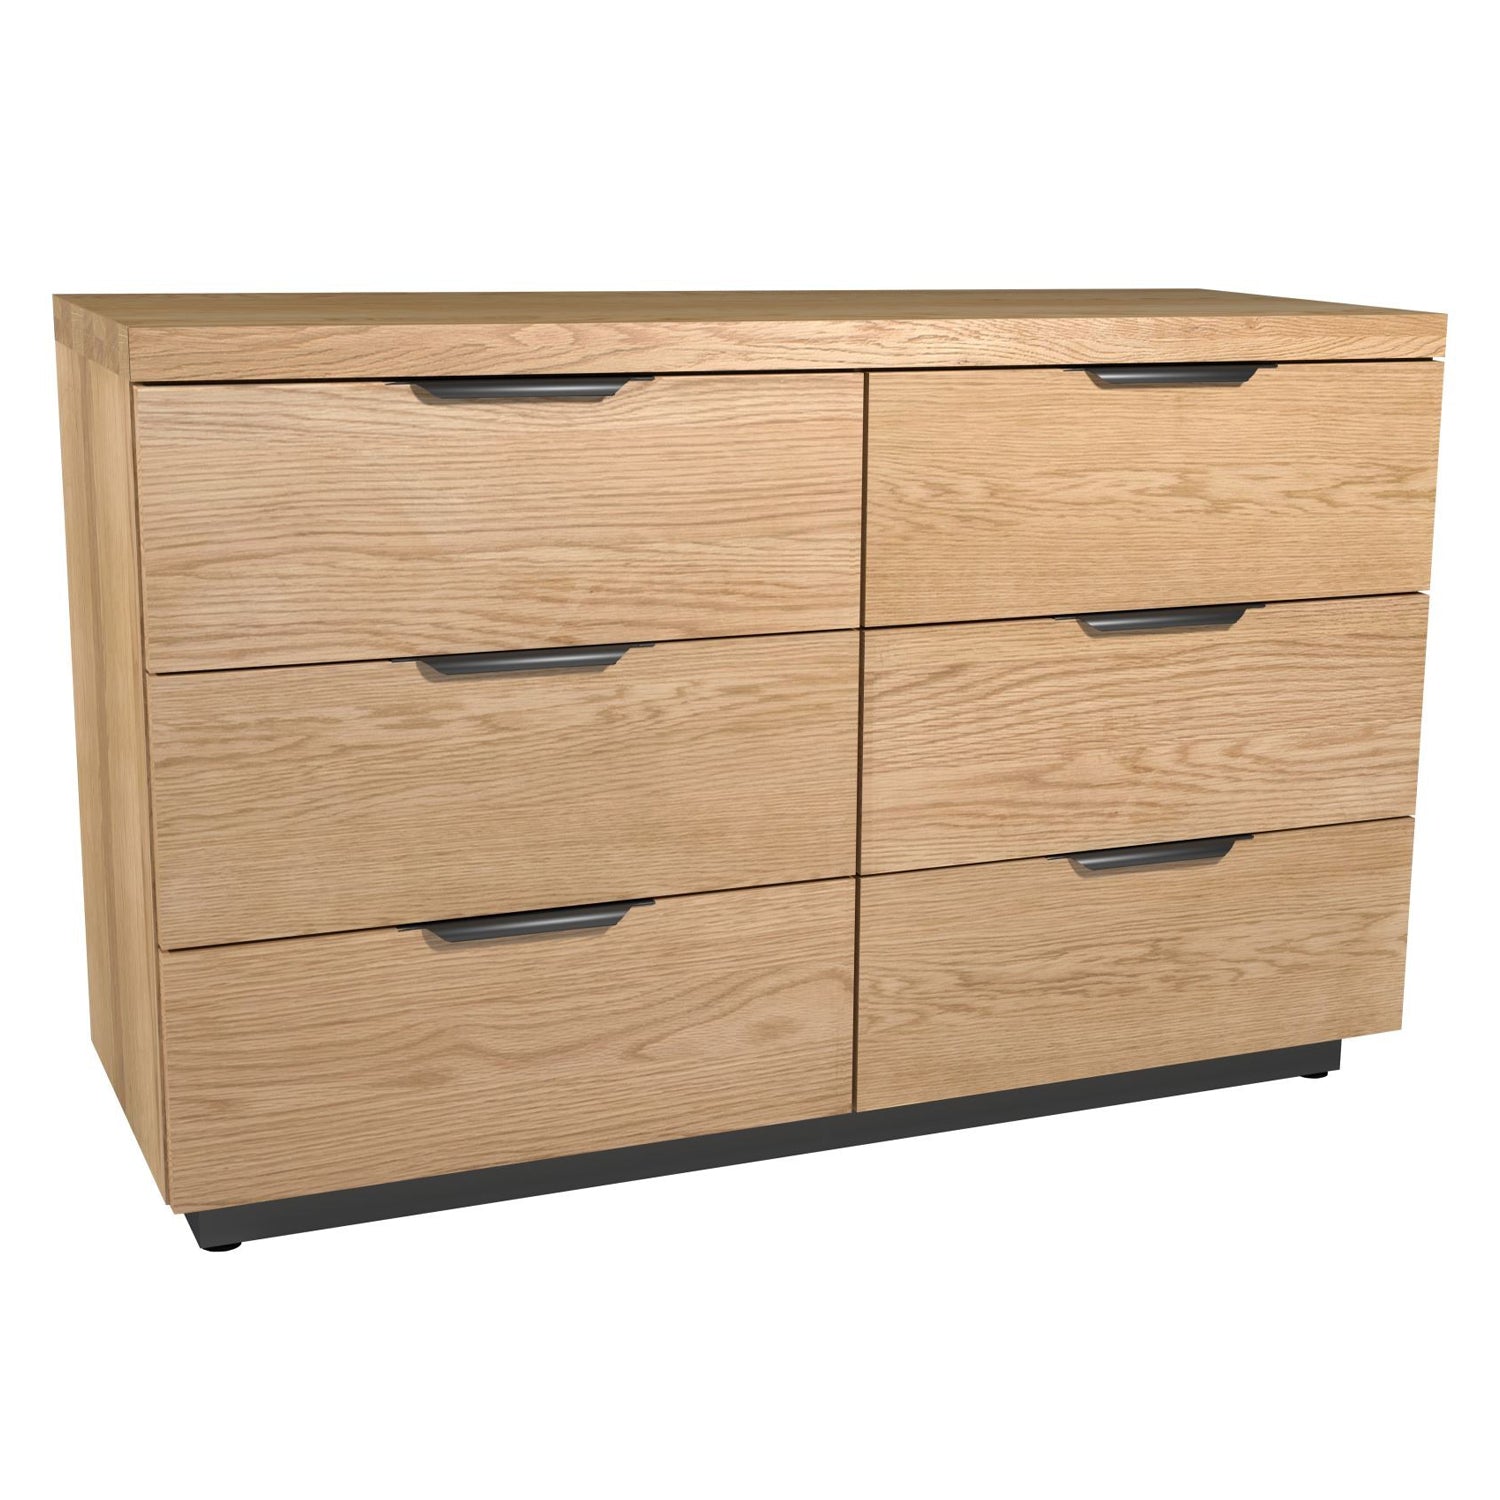 Elsworthy Oak Chest Of Drawers - 6 Drawer Wide